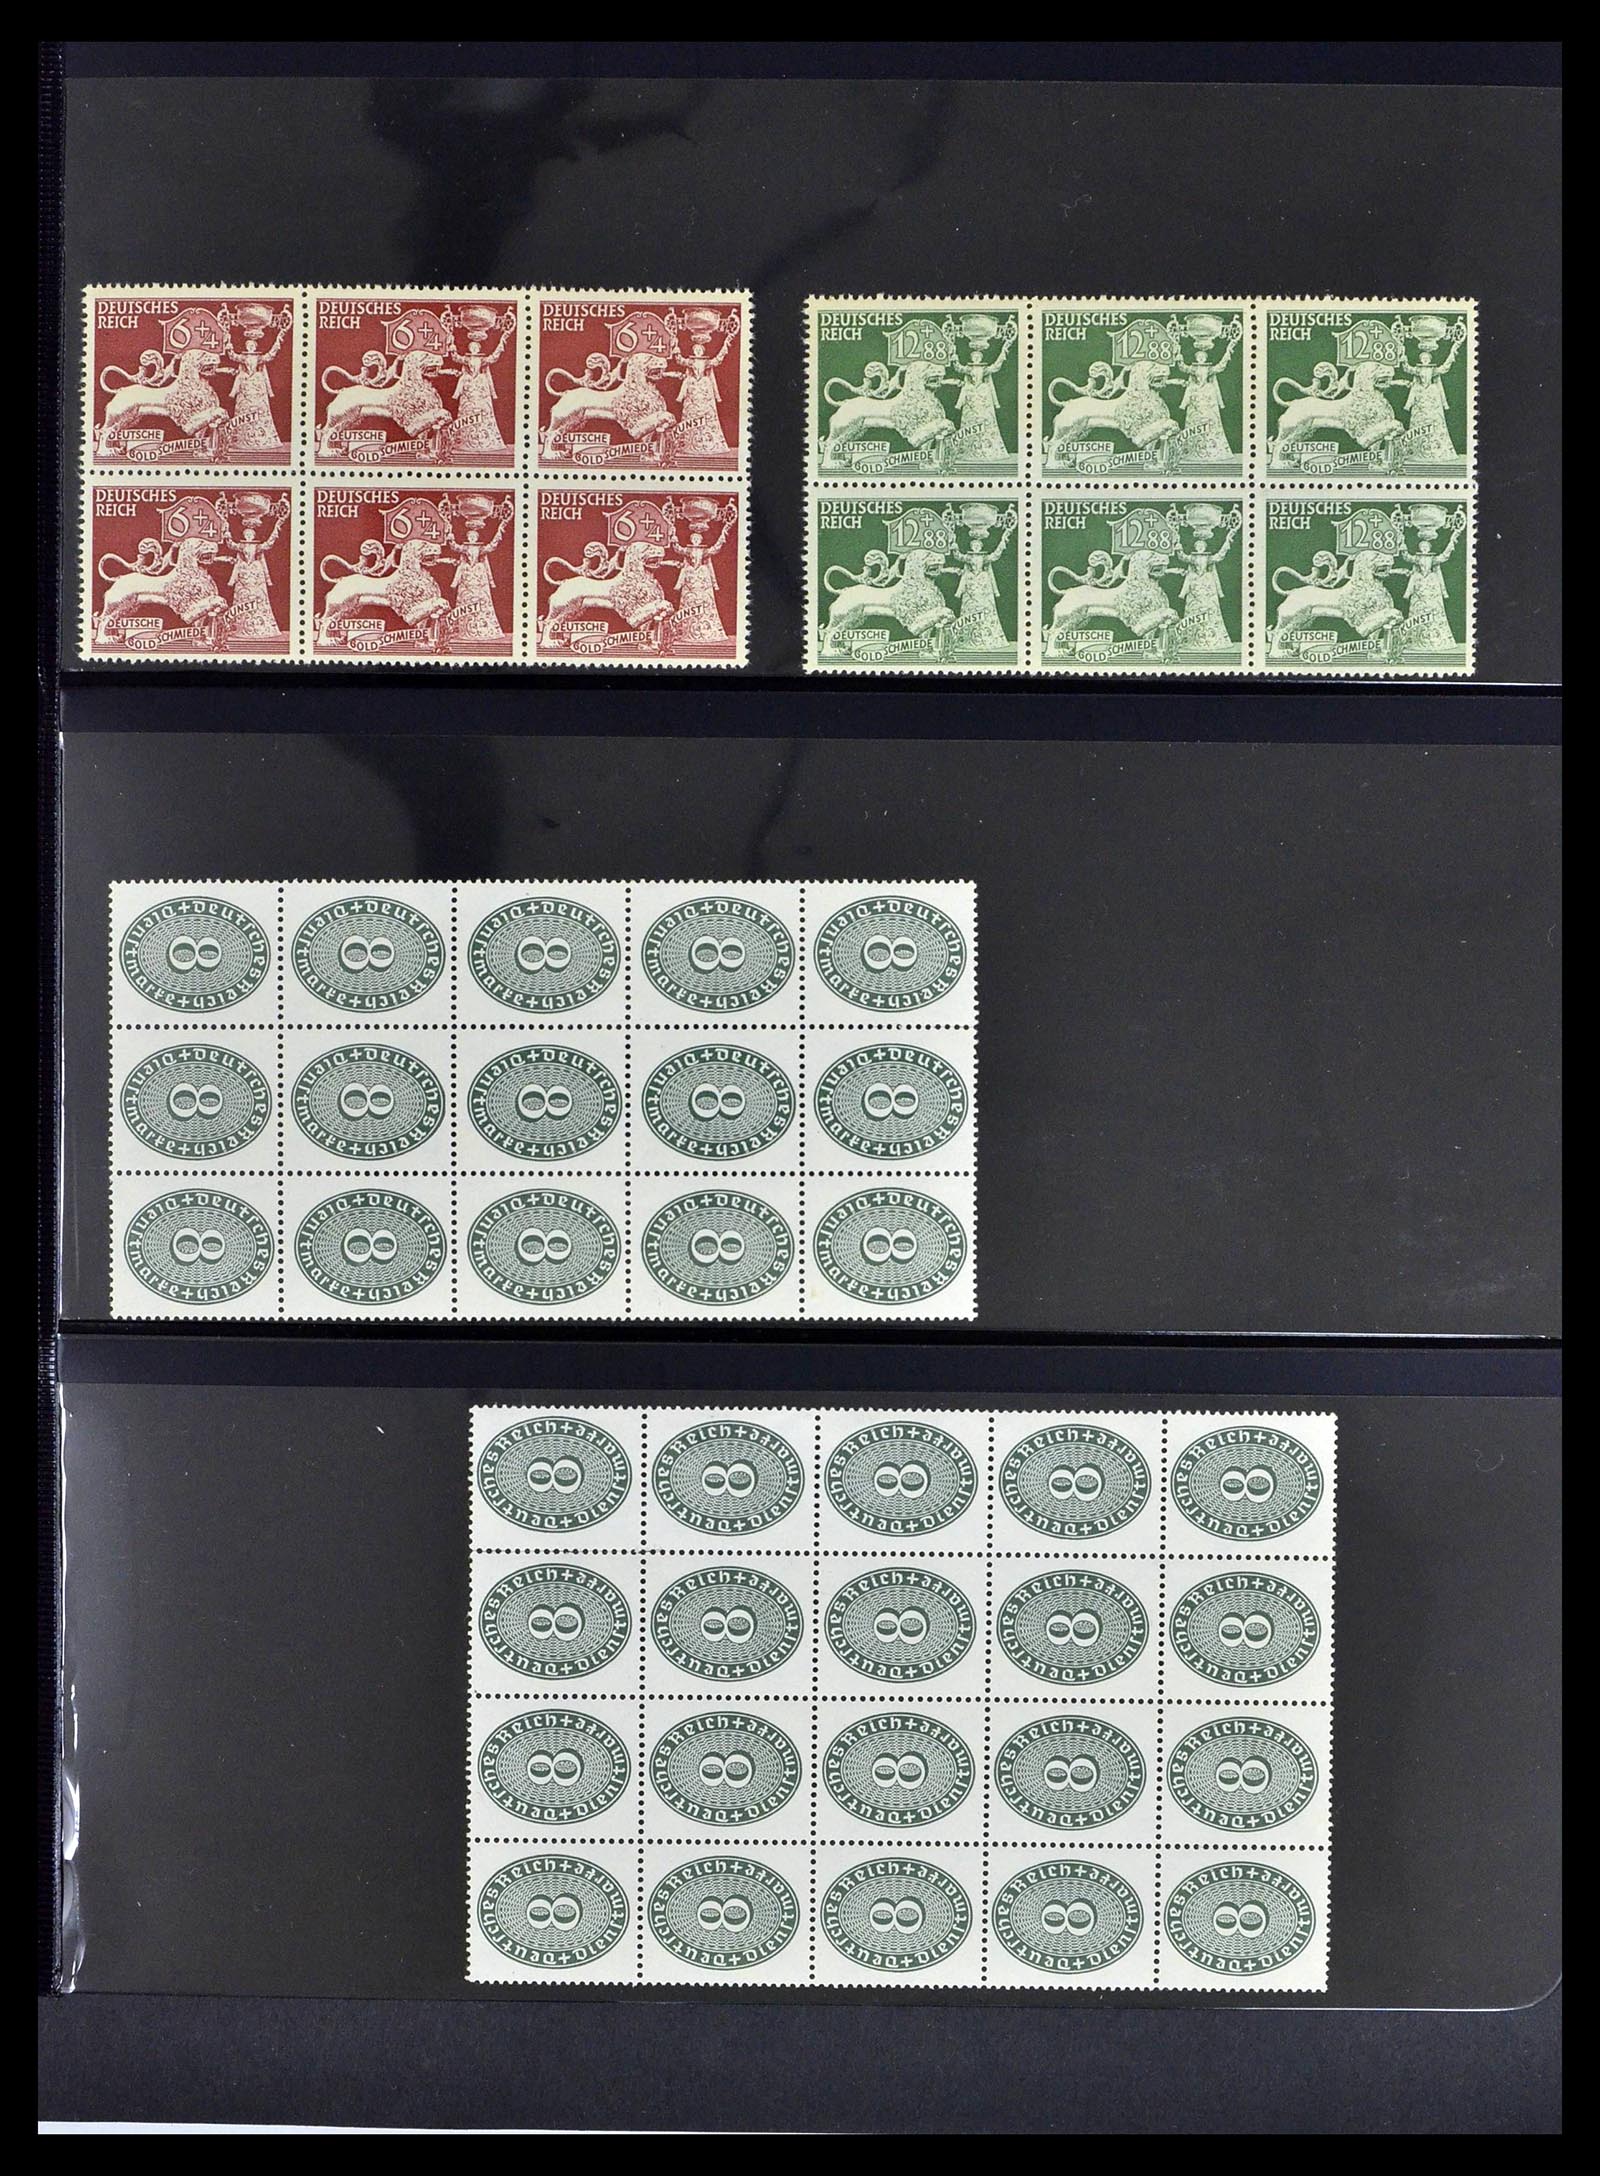 39255 0039 - Stamp collection 39255 German Reich MNH blocks of 4.